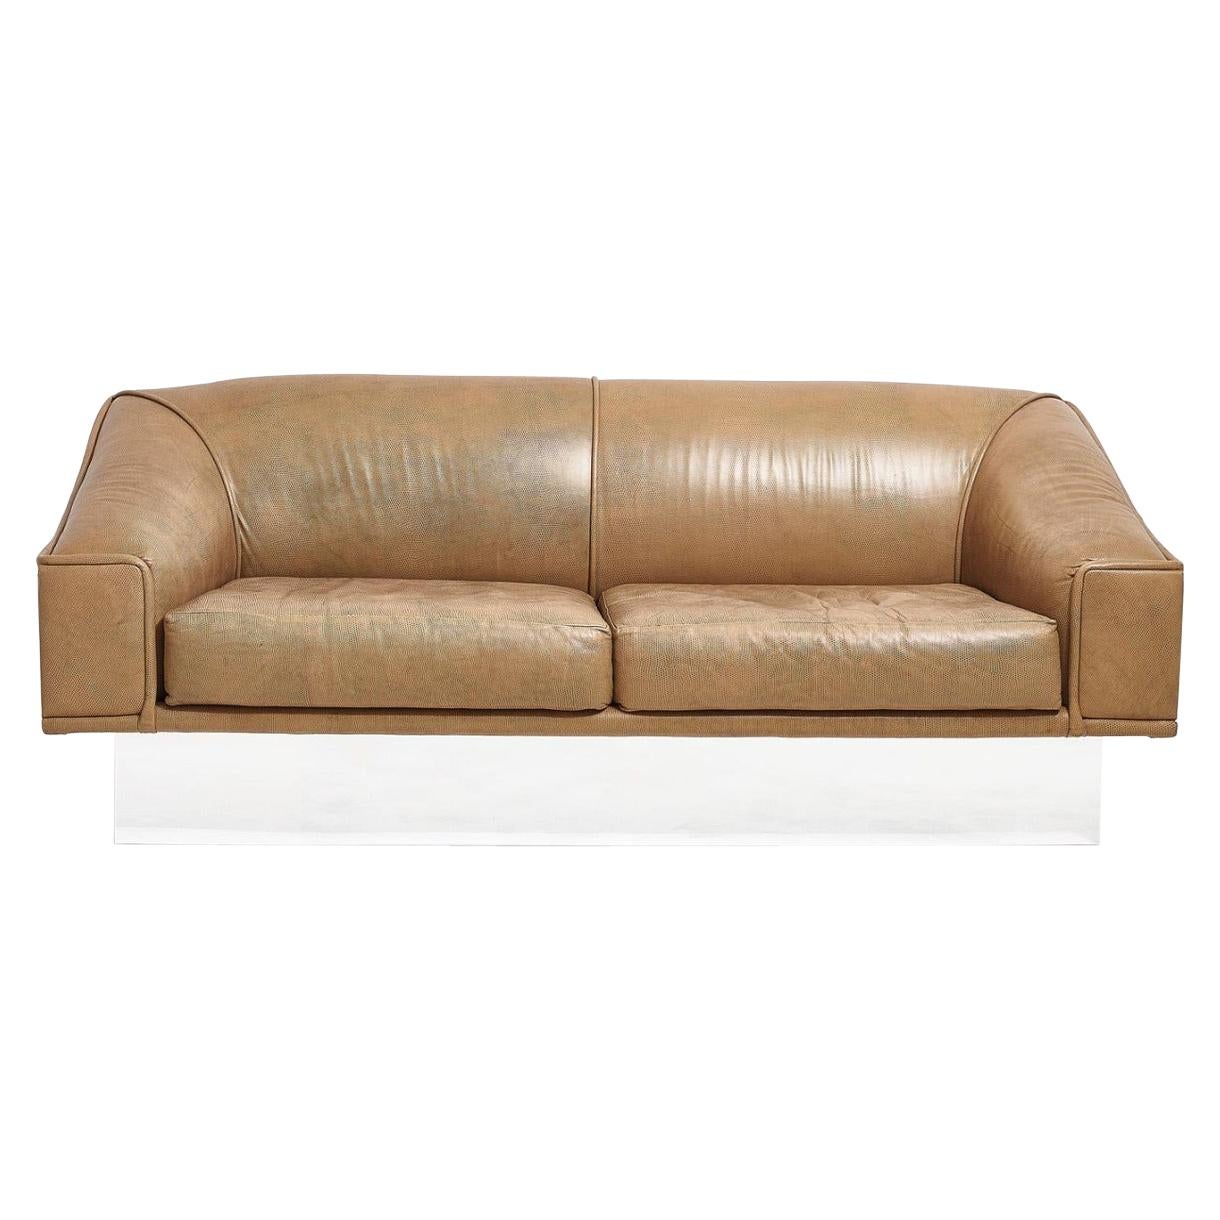 French Modern Sofa with Chrome Plinth Base For Sale at 1stDibs